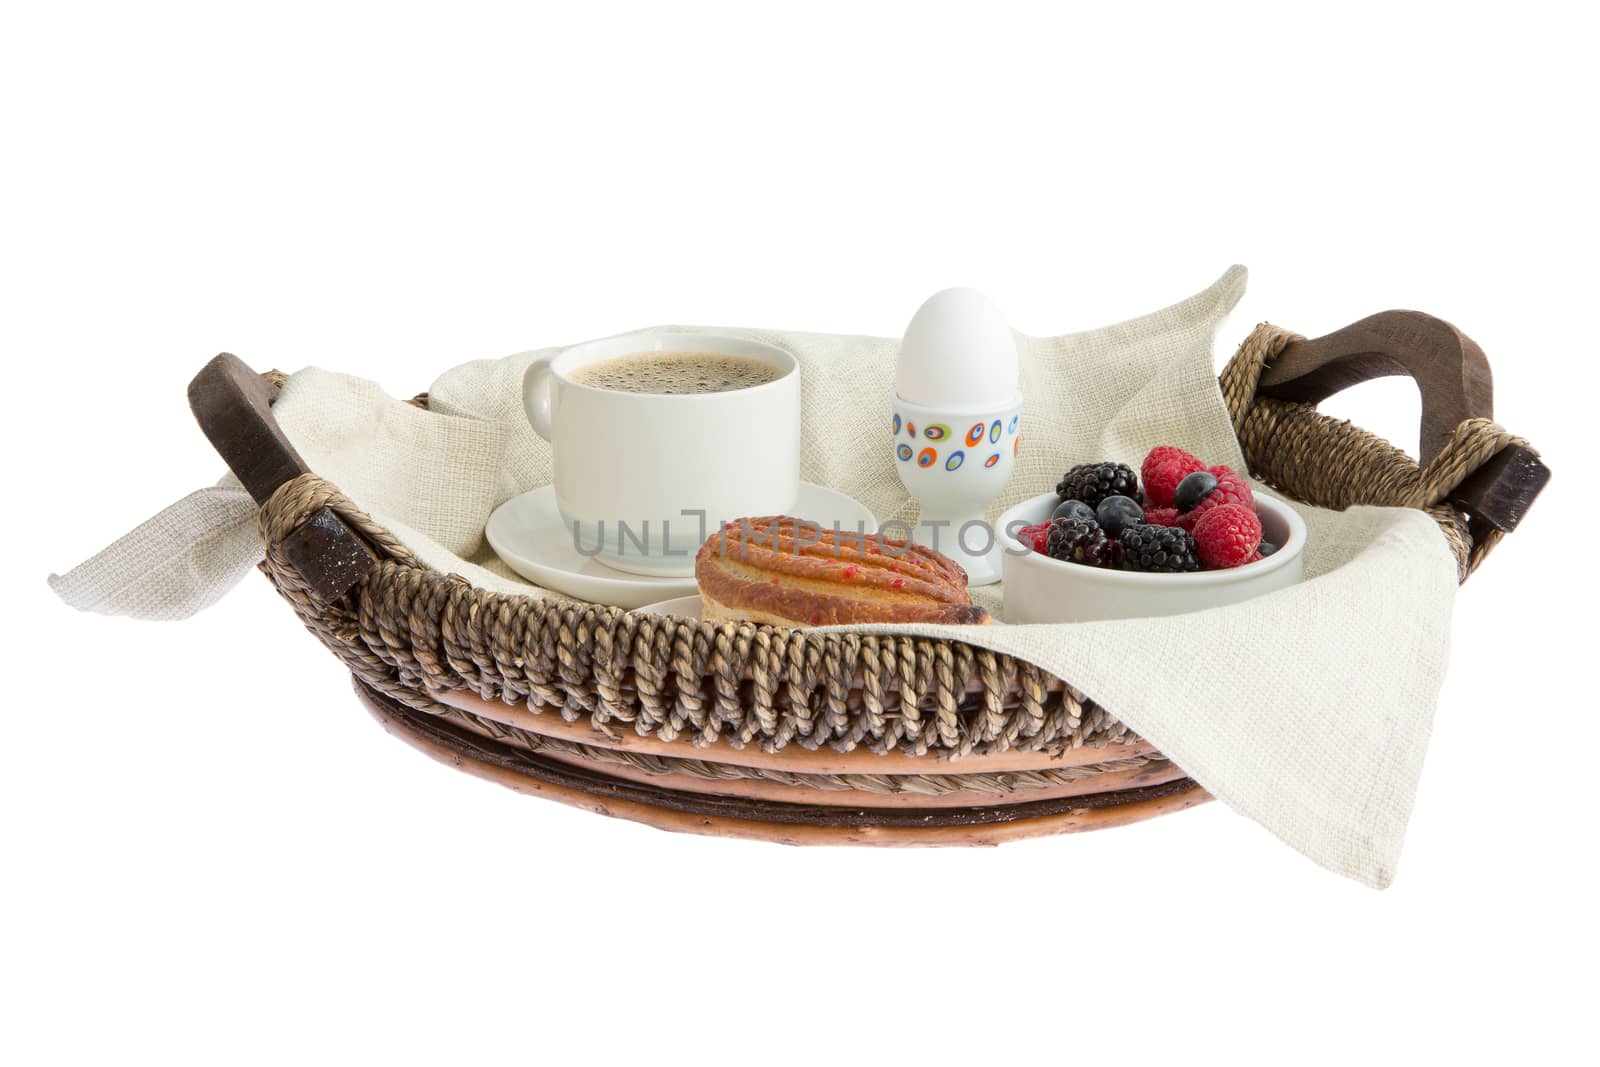 Rustic wickerwork breakfast tray set with coffee, egg, pastry and fresh assorted berries viewed low angle isolated on white